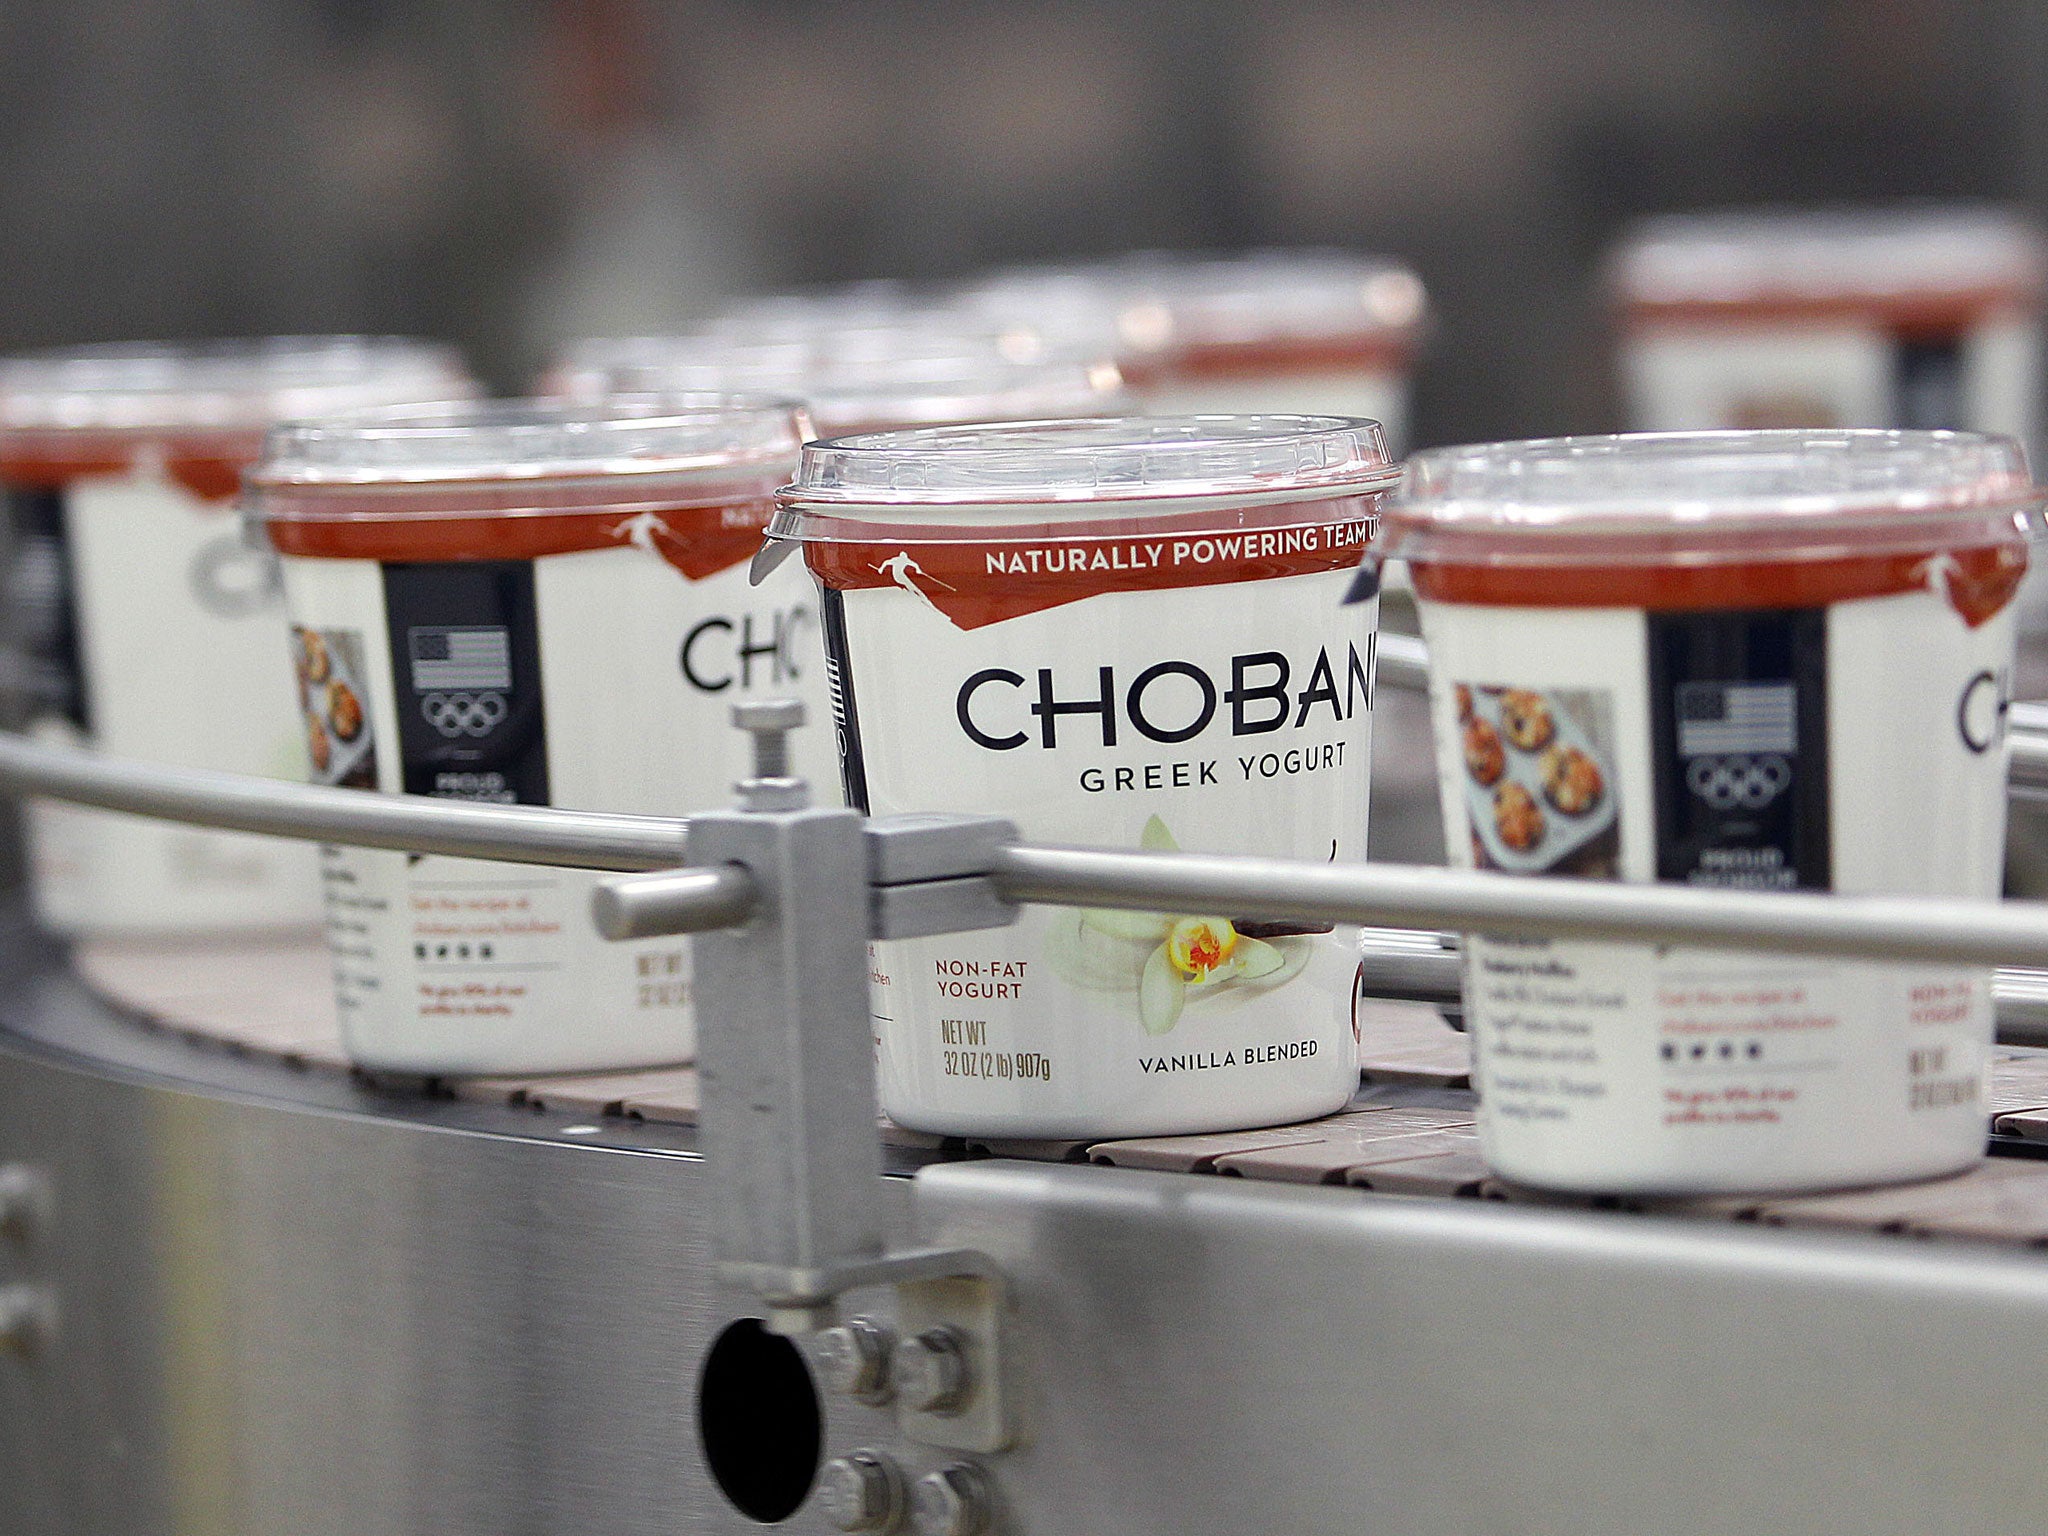 Chobani is now valued at between $3 billion and $5 billion